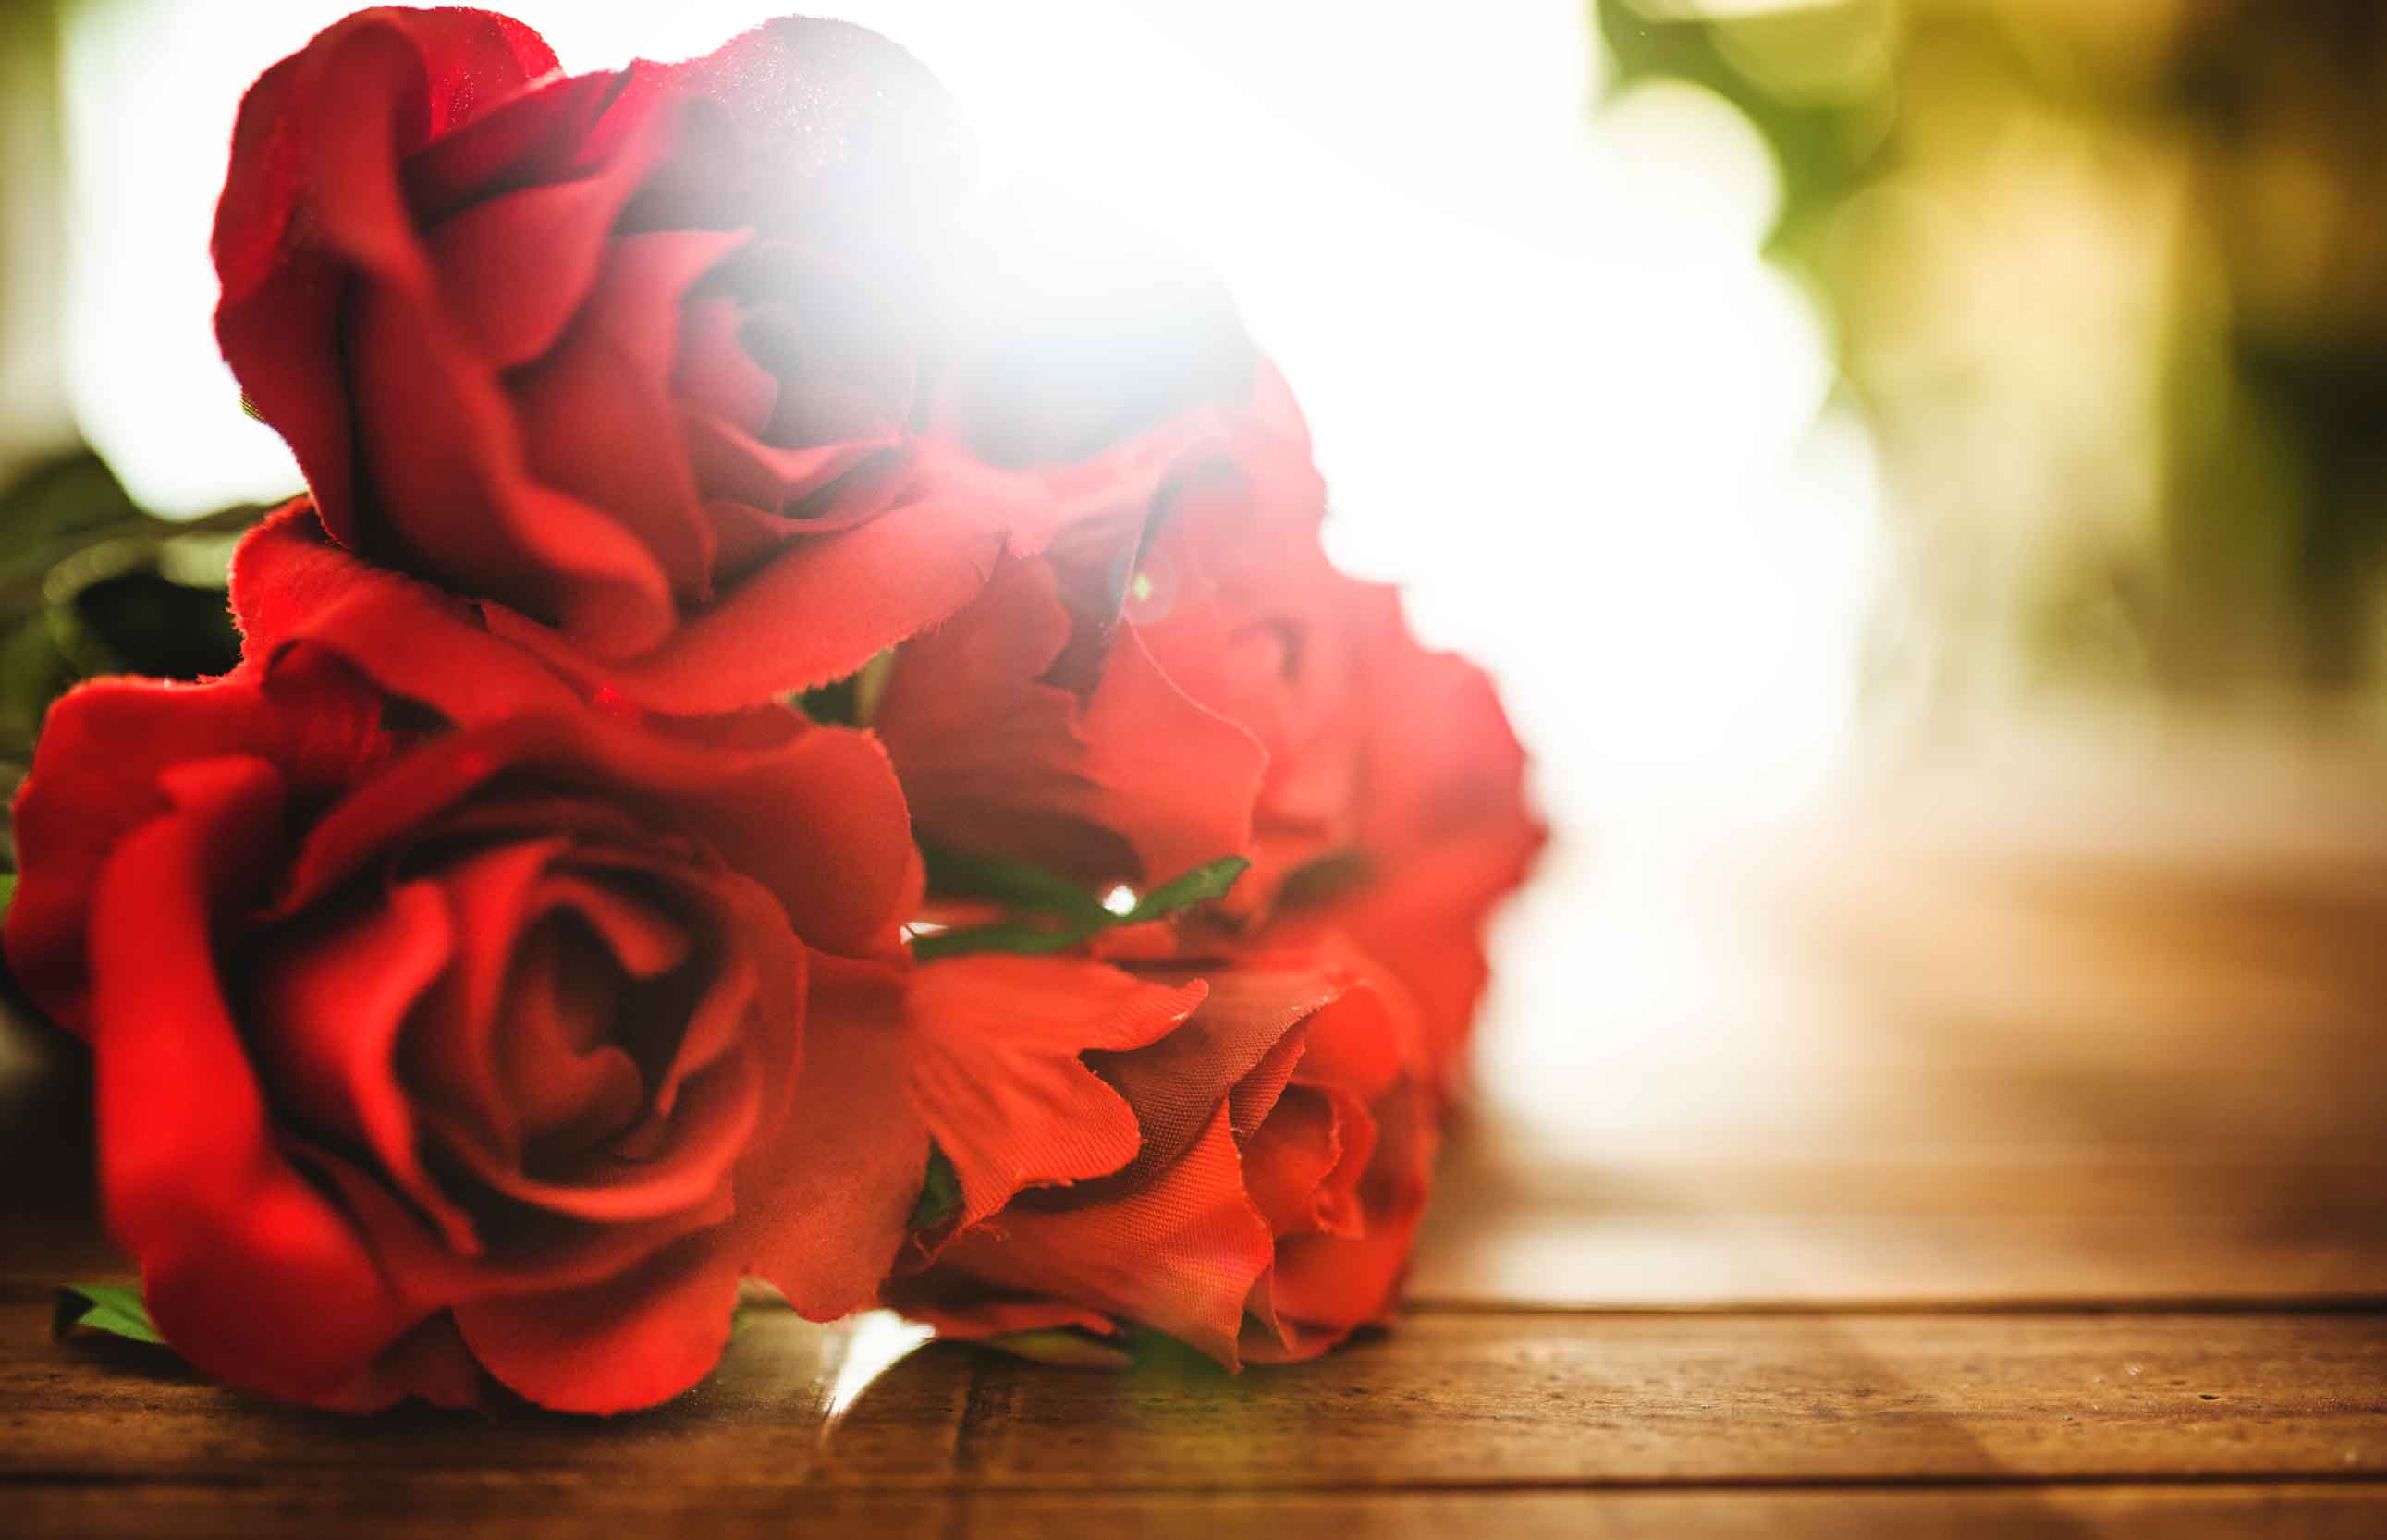 The cost of red roses for Valentine's Day keeps going up.